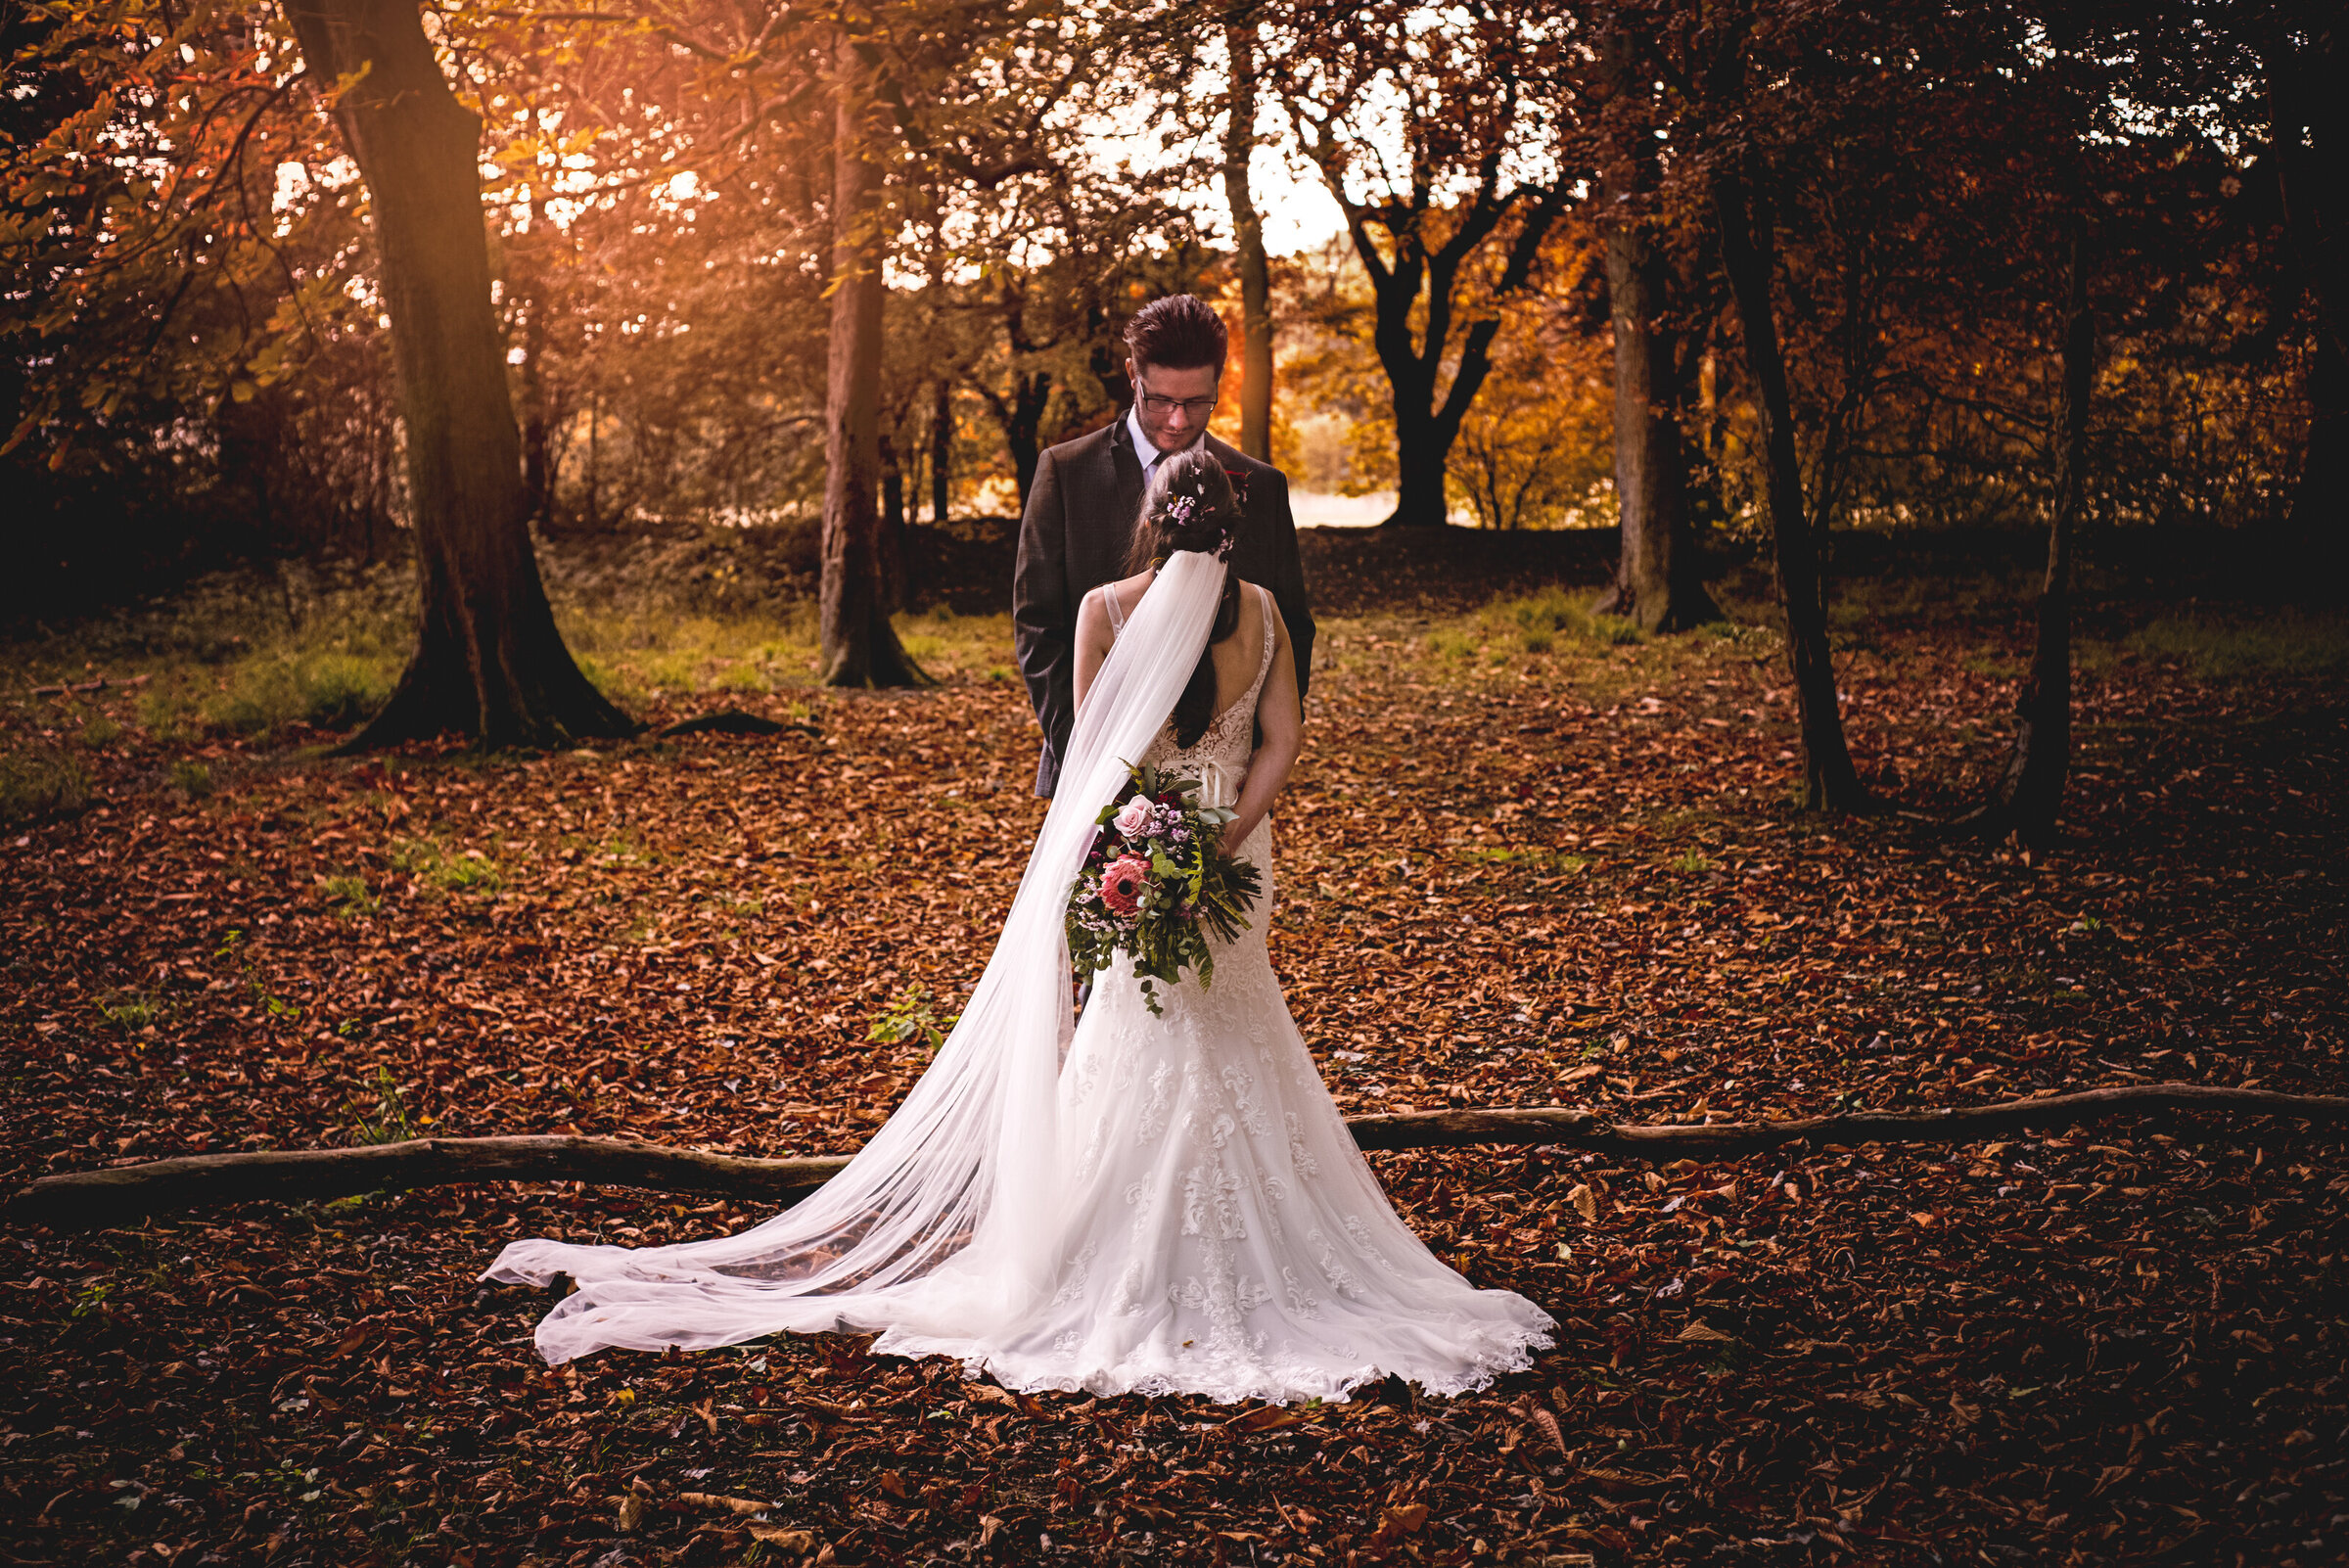 In a tranquil autumn forest, a newly eloped couple embraces in a quiet moment, surrounded by fallen leaves. The bride, in an exquisite gown with a flowing veil, and the groom, in a classic suit, capture the essence of their secluded and romantic celebration.